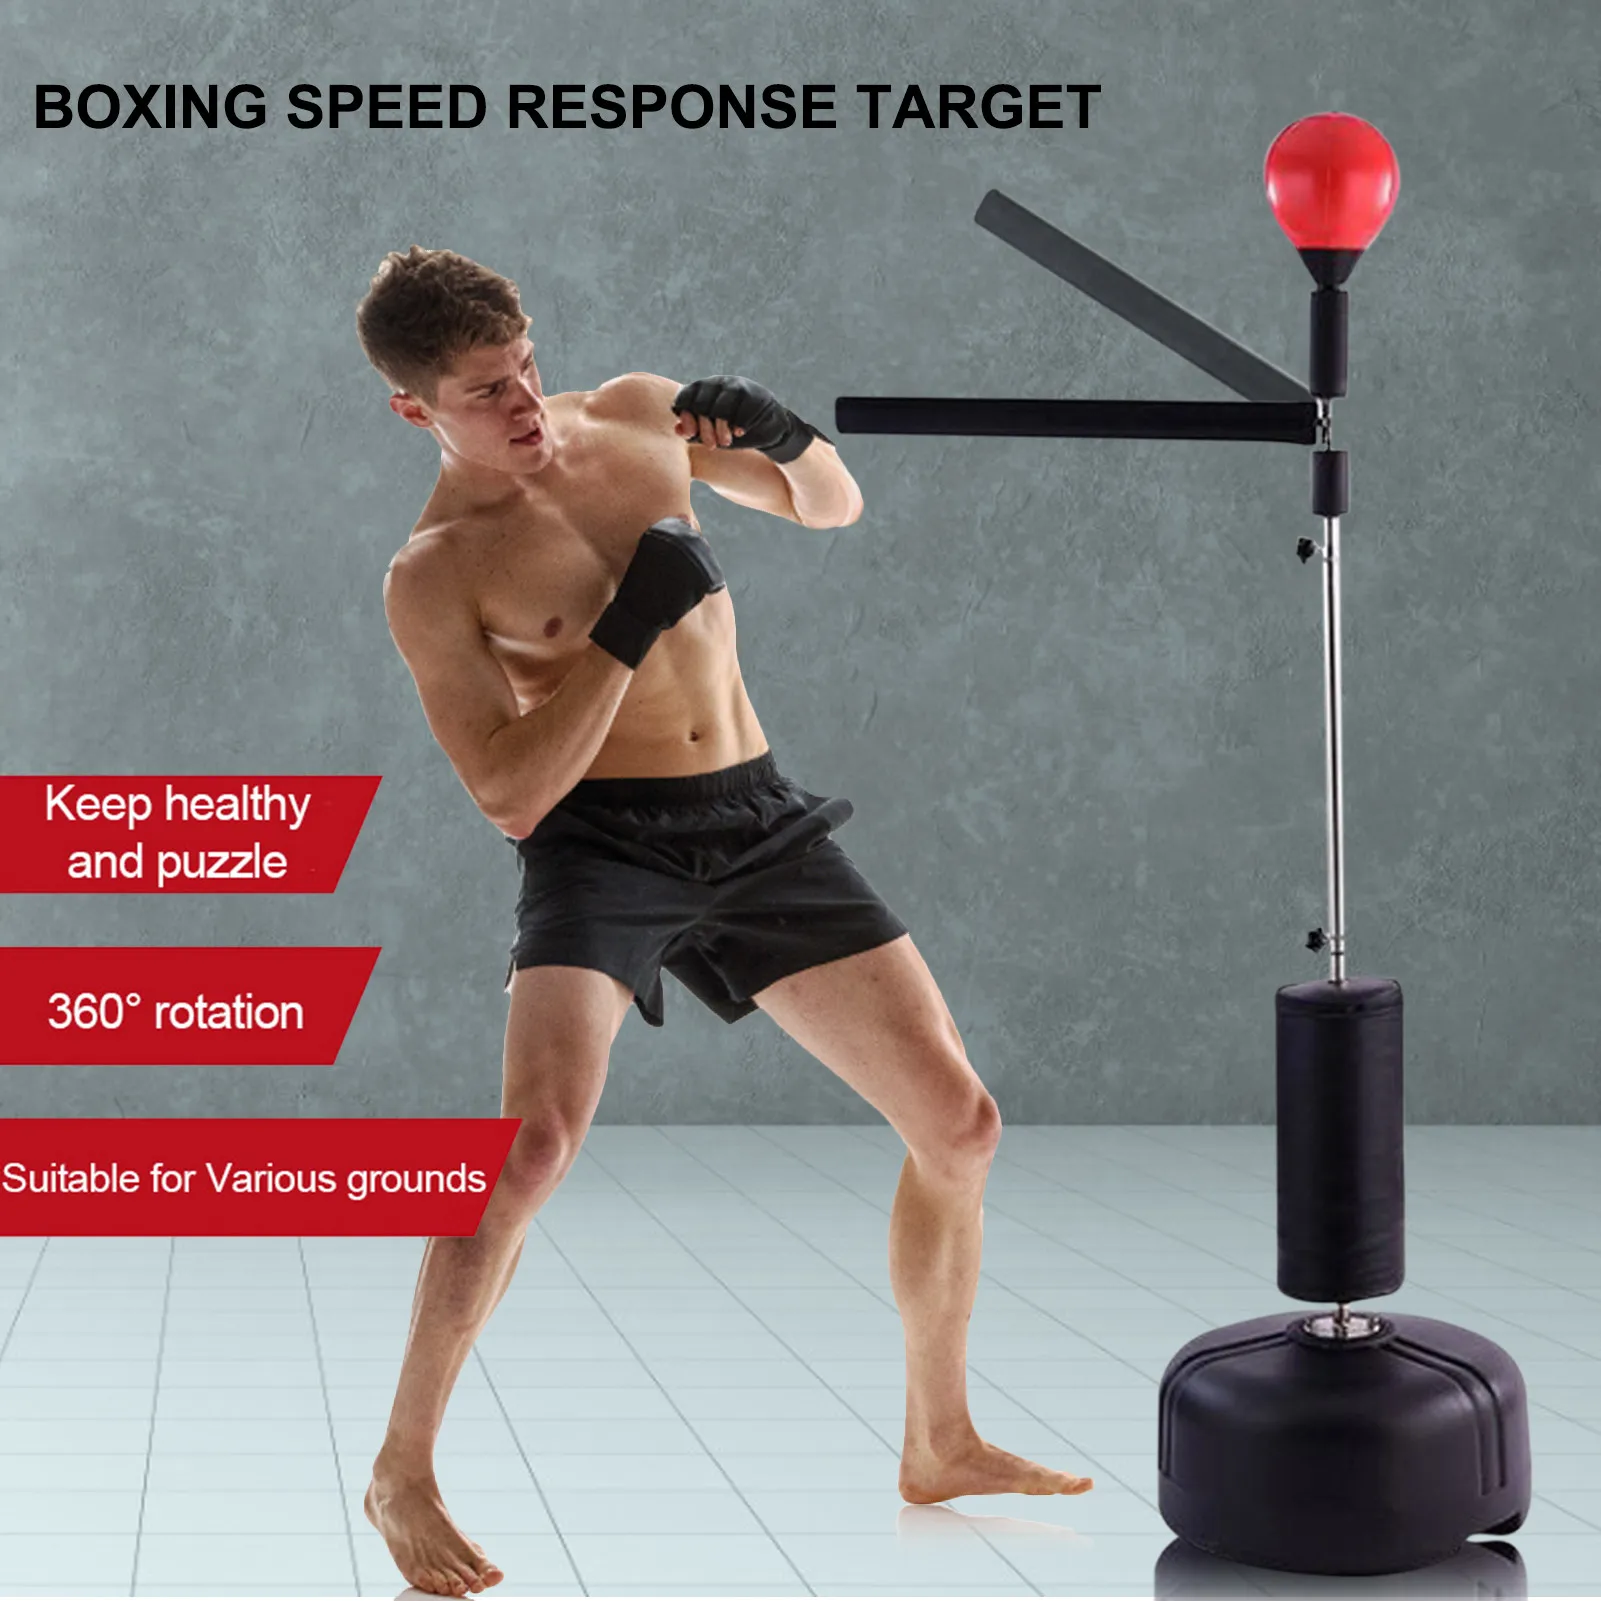 Renewed Strong Durable Spring Withstands Tough Hits for Stress Relief & Fitness Hand Pump & Adjustable Height Stand Tech Tools Boxing Ball Set with Punching Ball Boxing Gloves 